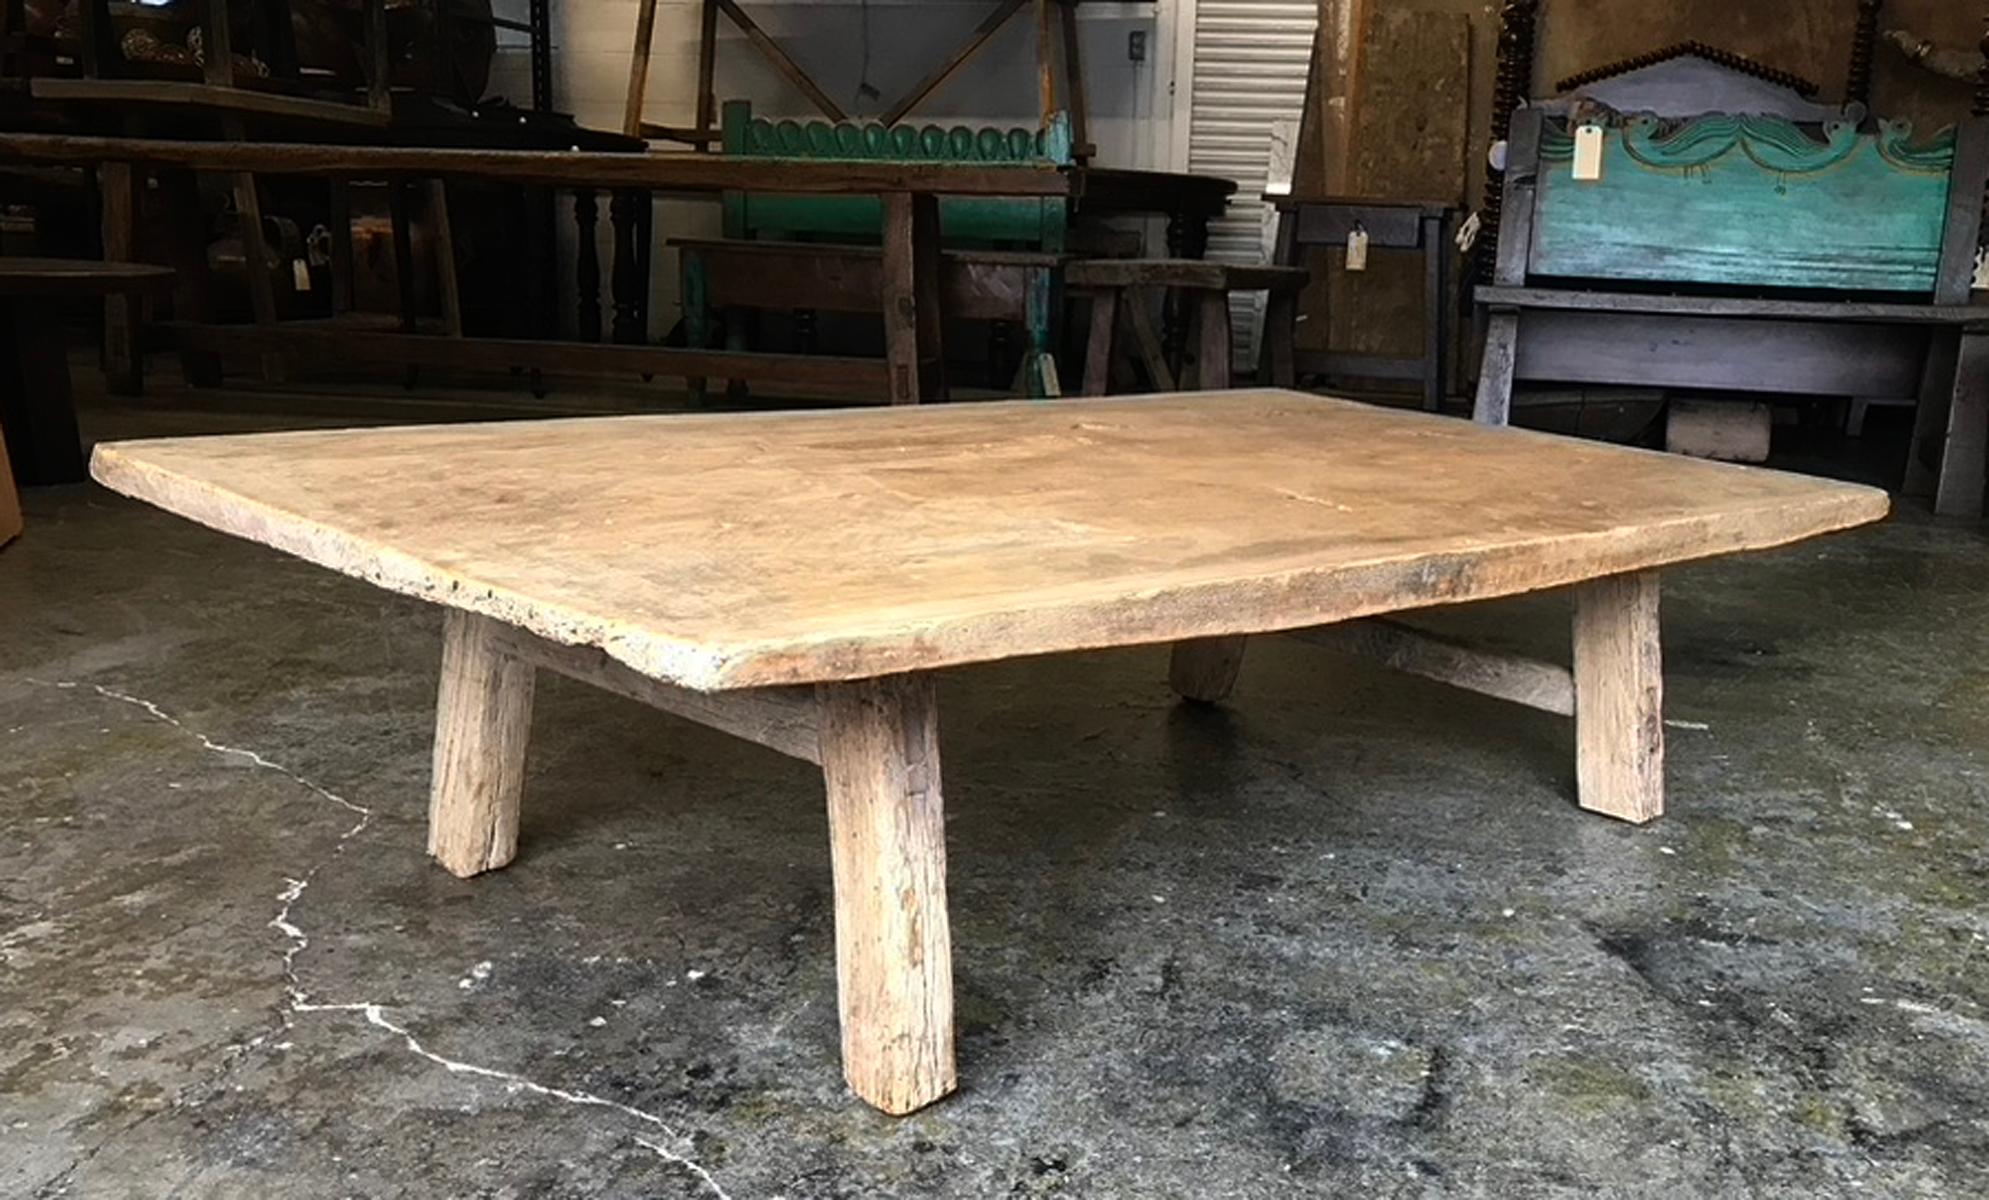 This coffee table consists of a naturally aged, one wide board, hand hewn 19th century top. The patina is smooth and beautiful. The wood is a light honey color. Legs have been added recently and finished to match this top. Knots and natural age